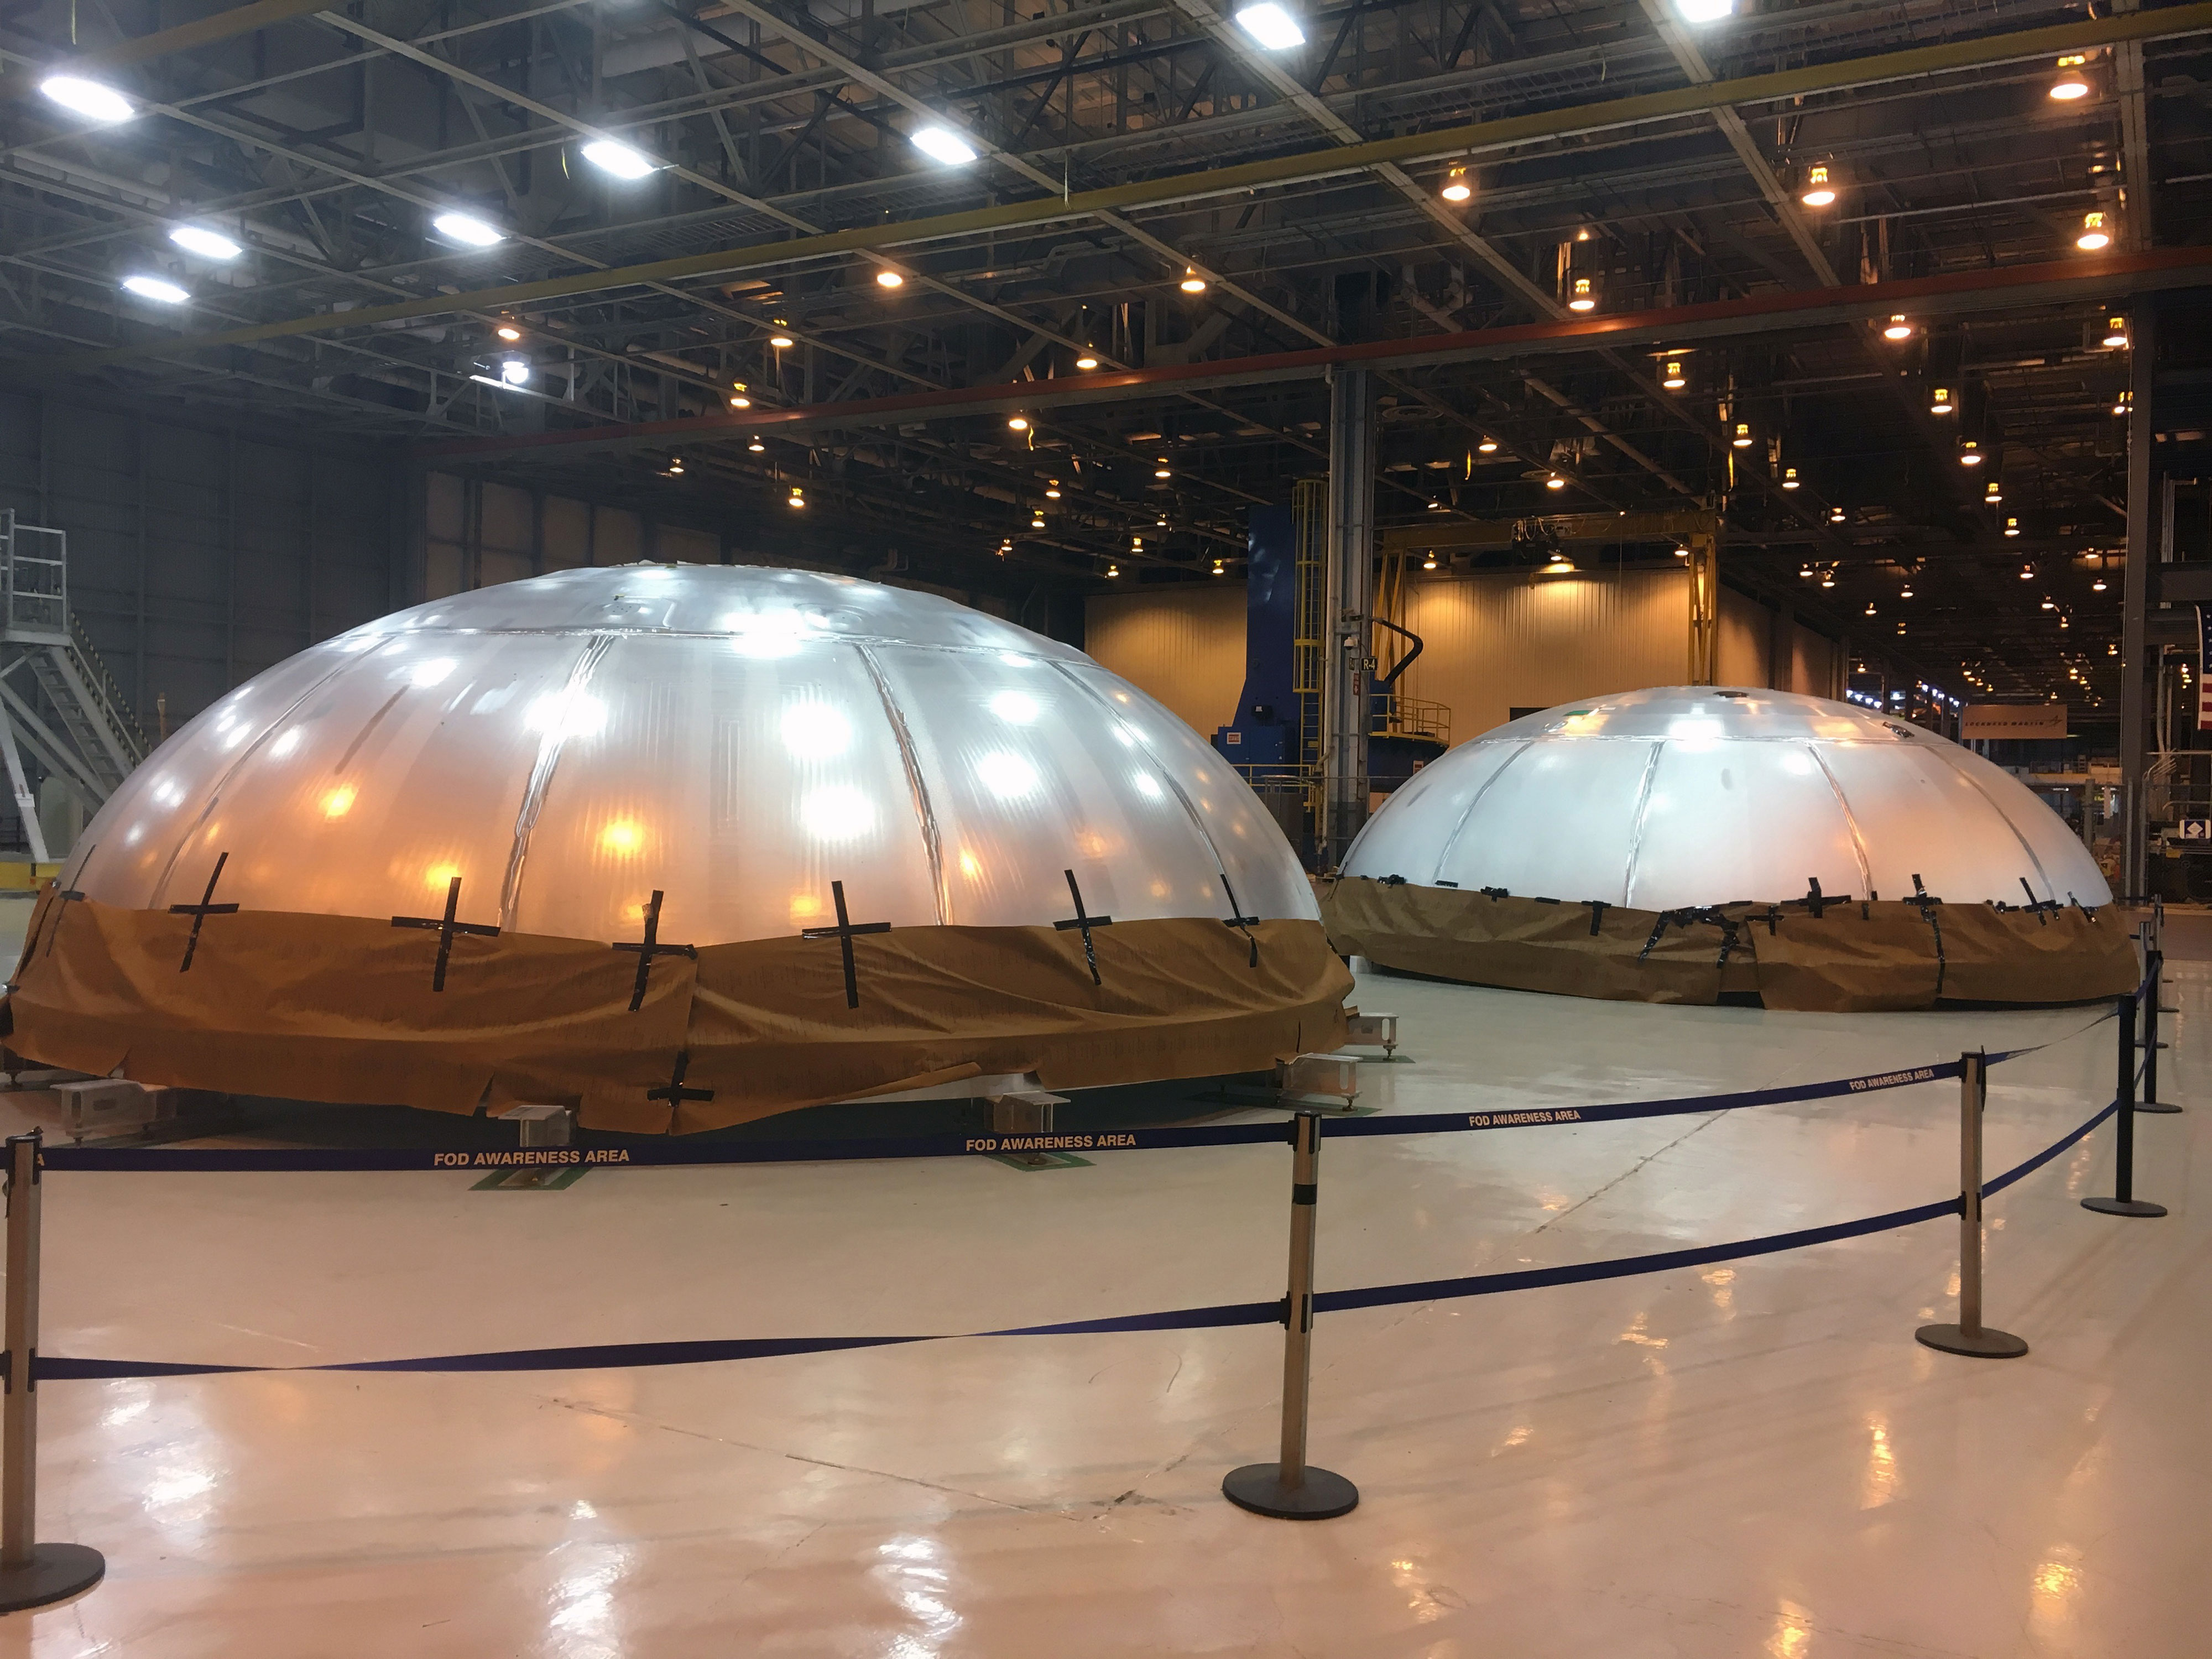 Two fuel tank domes were recently finished for the SLS rocket. One is a qualification article and the other is the actual flight article for the first mission (EM-1) set to launch in 2018. Credit: Chase Clark